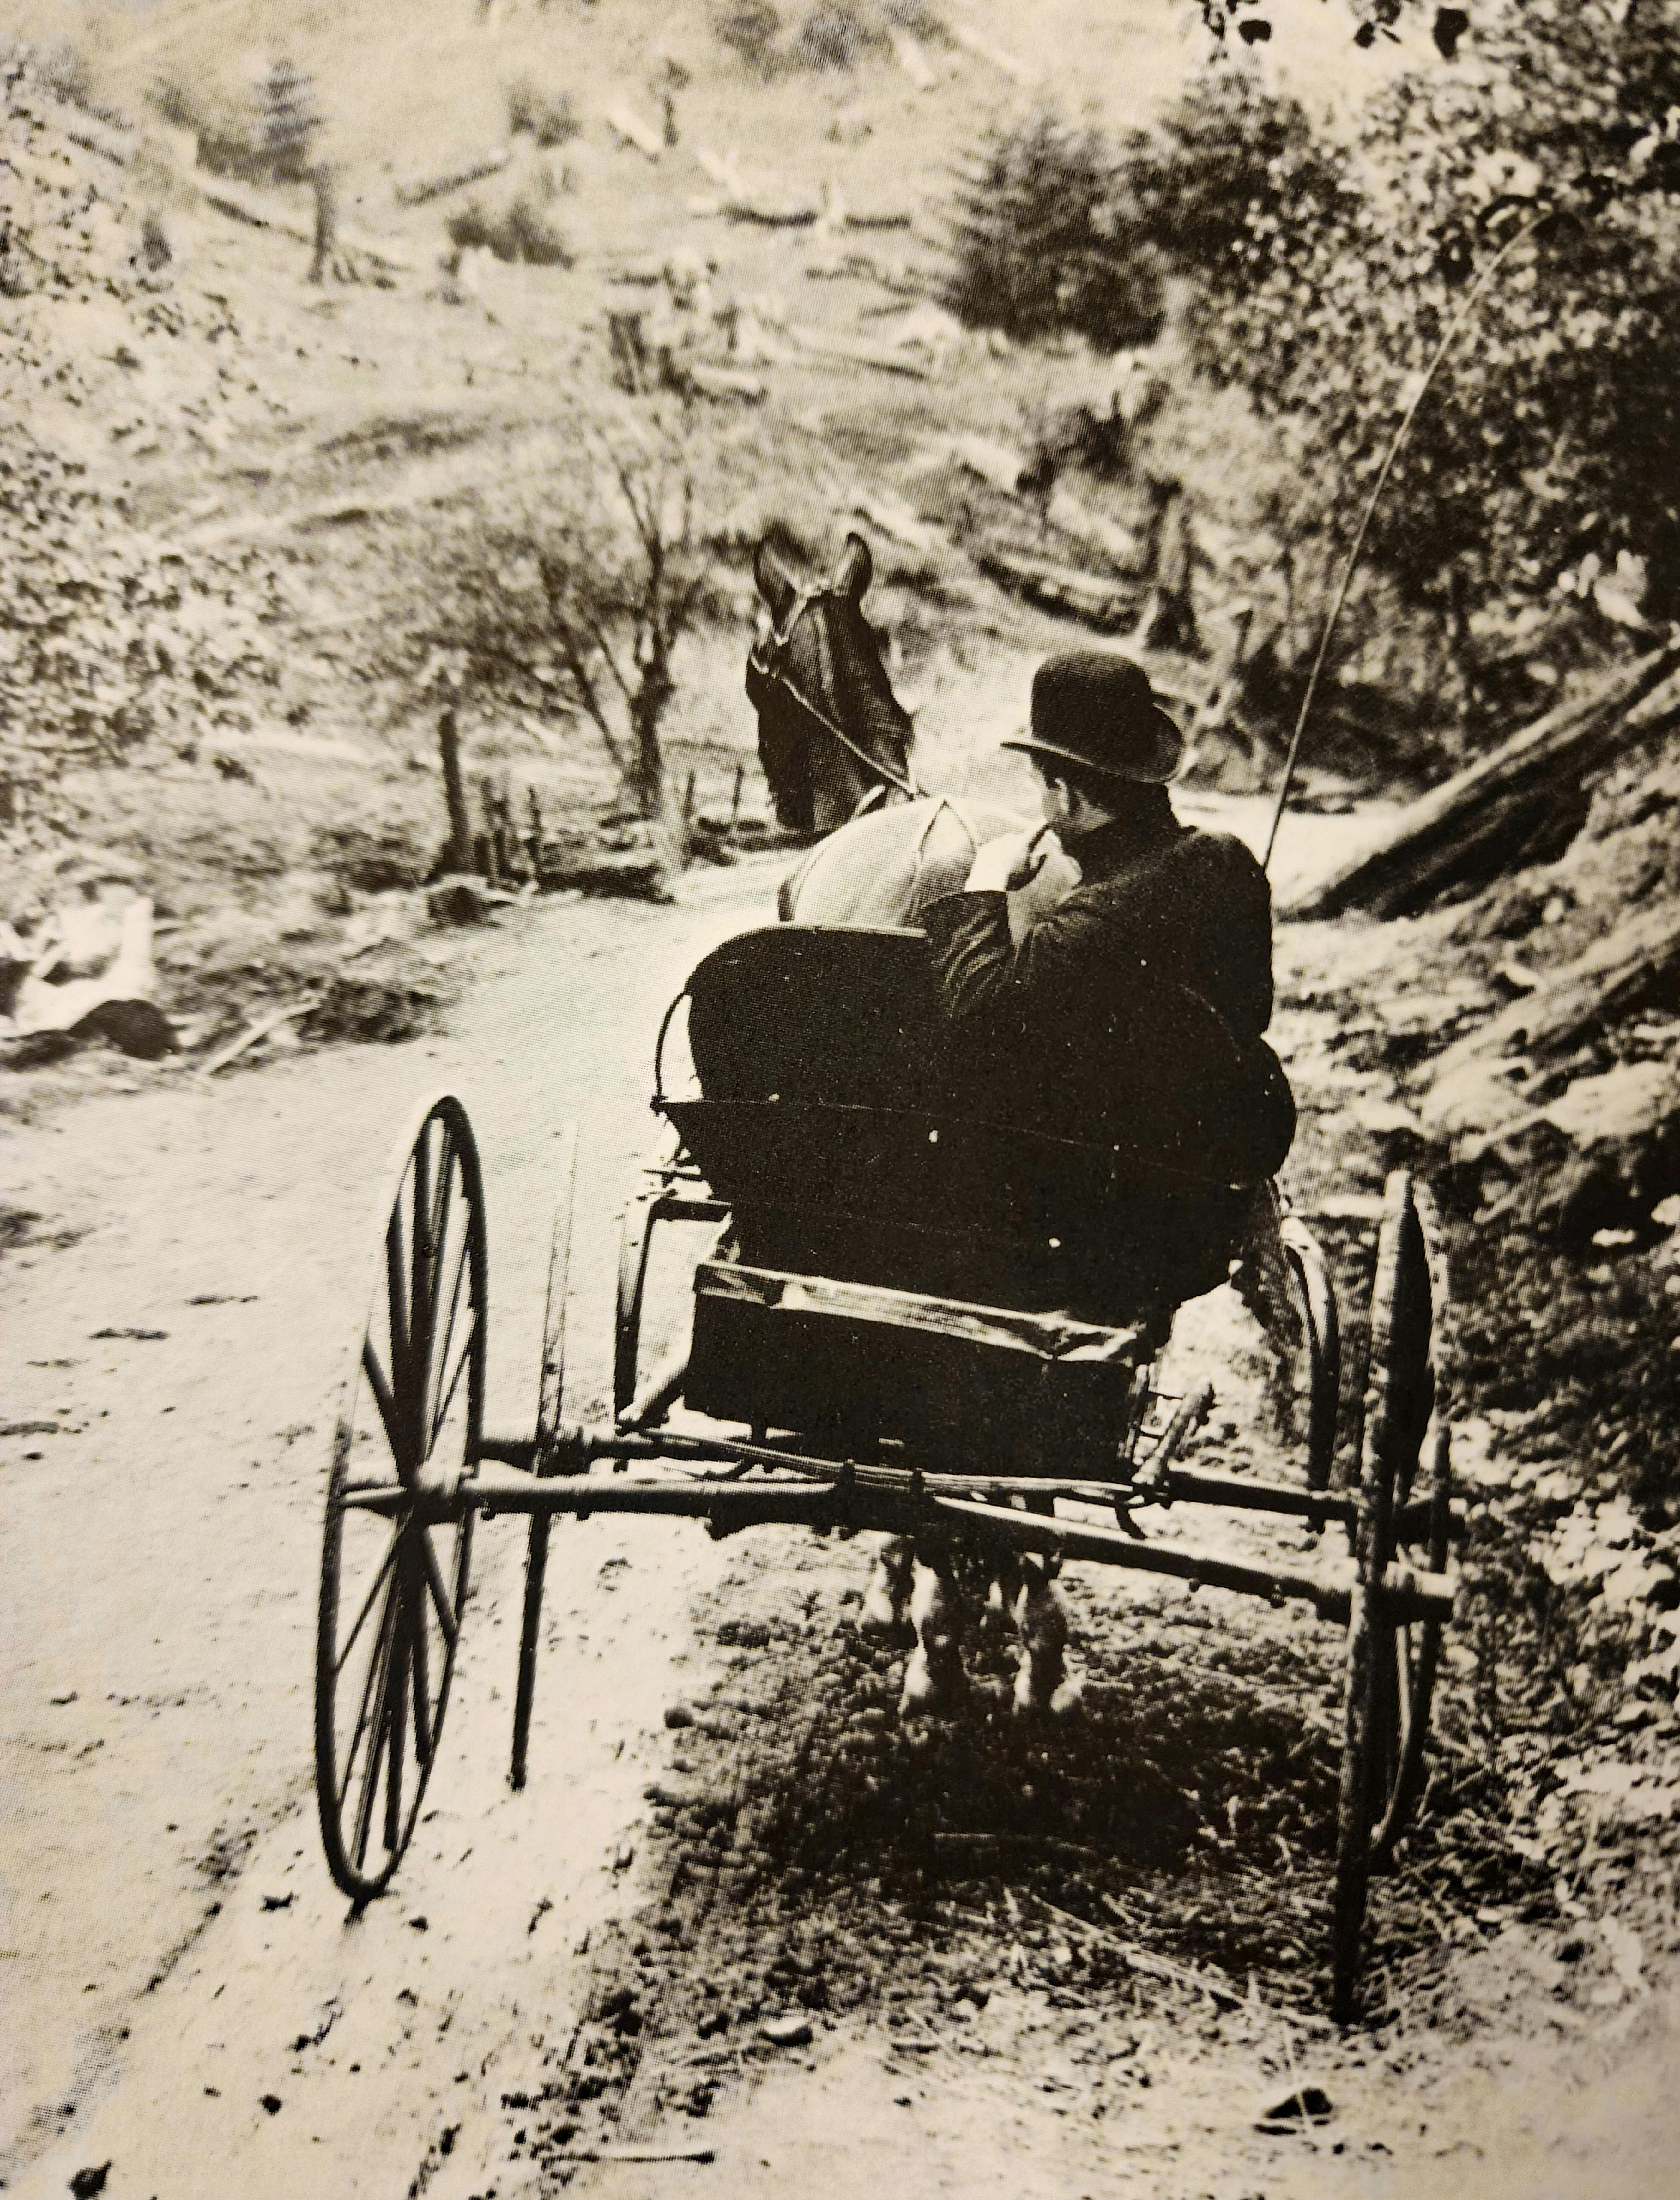 Man and his one horse buggy, chilling - Circa 1880s.jpg